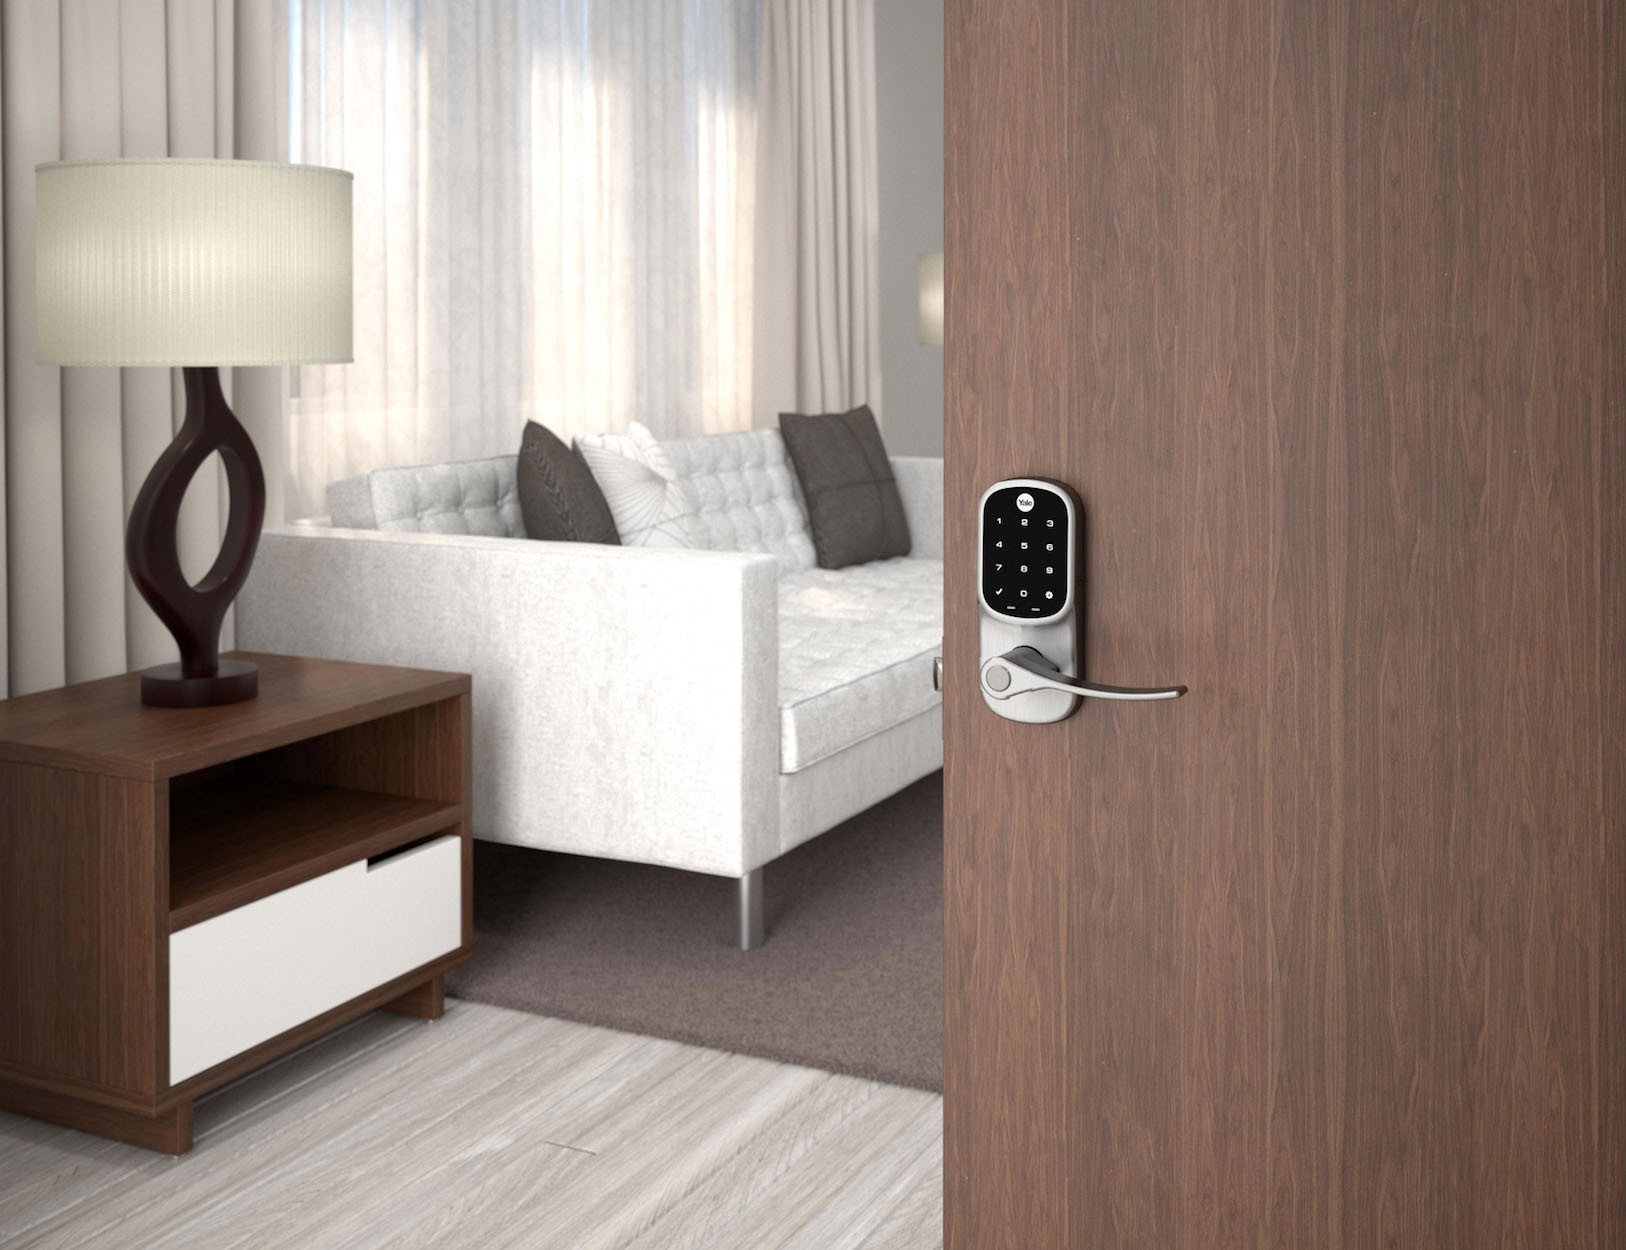 Yale has expanded its Assure Lock line of smart locks with the new, non-deadbolt Assure Lever